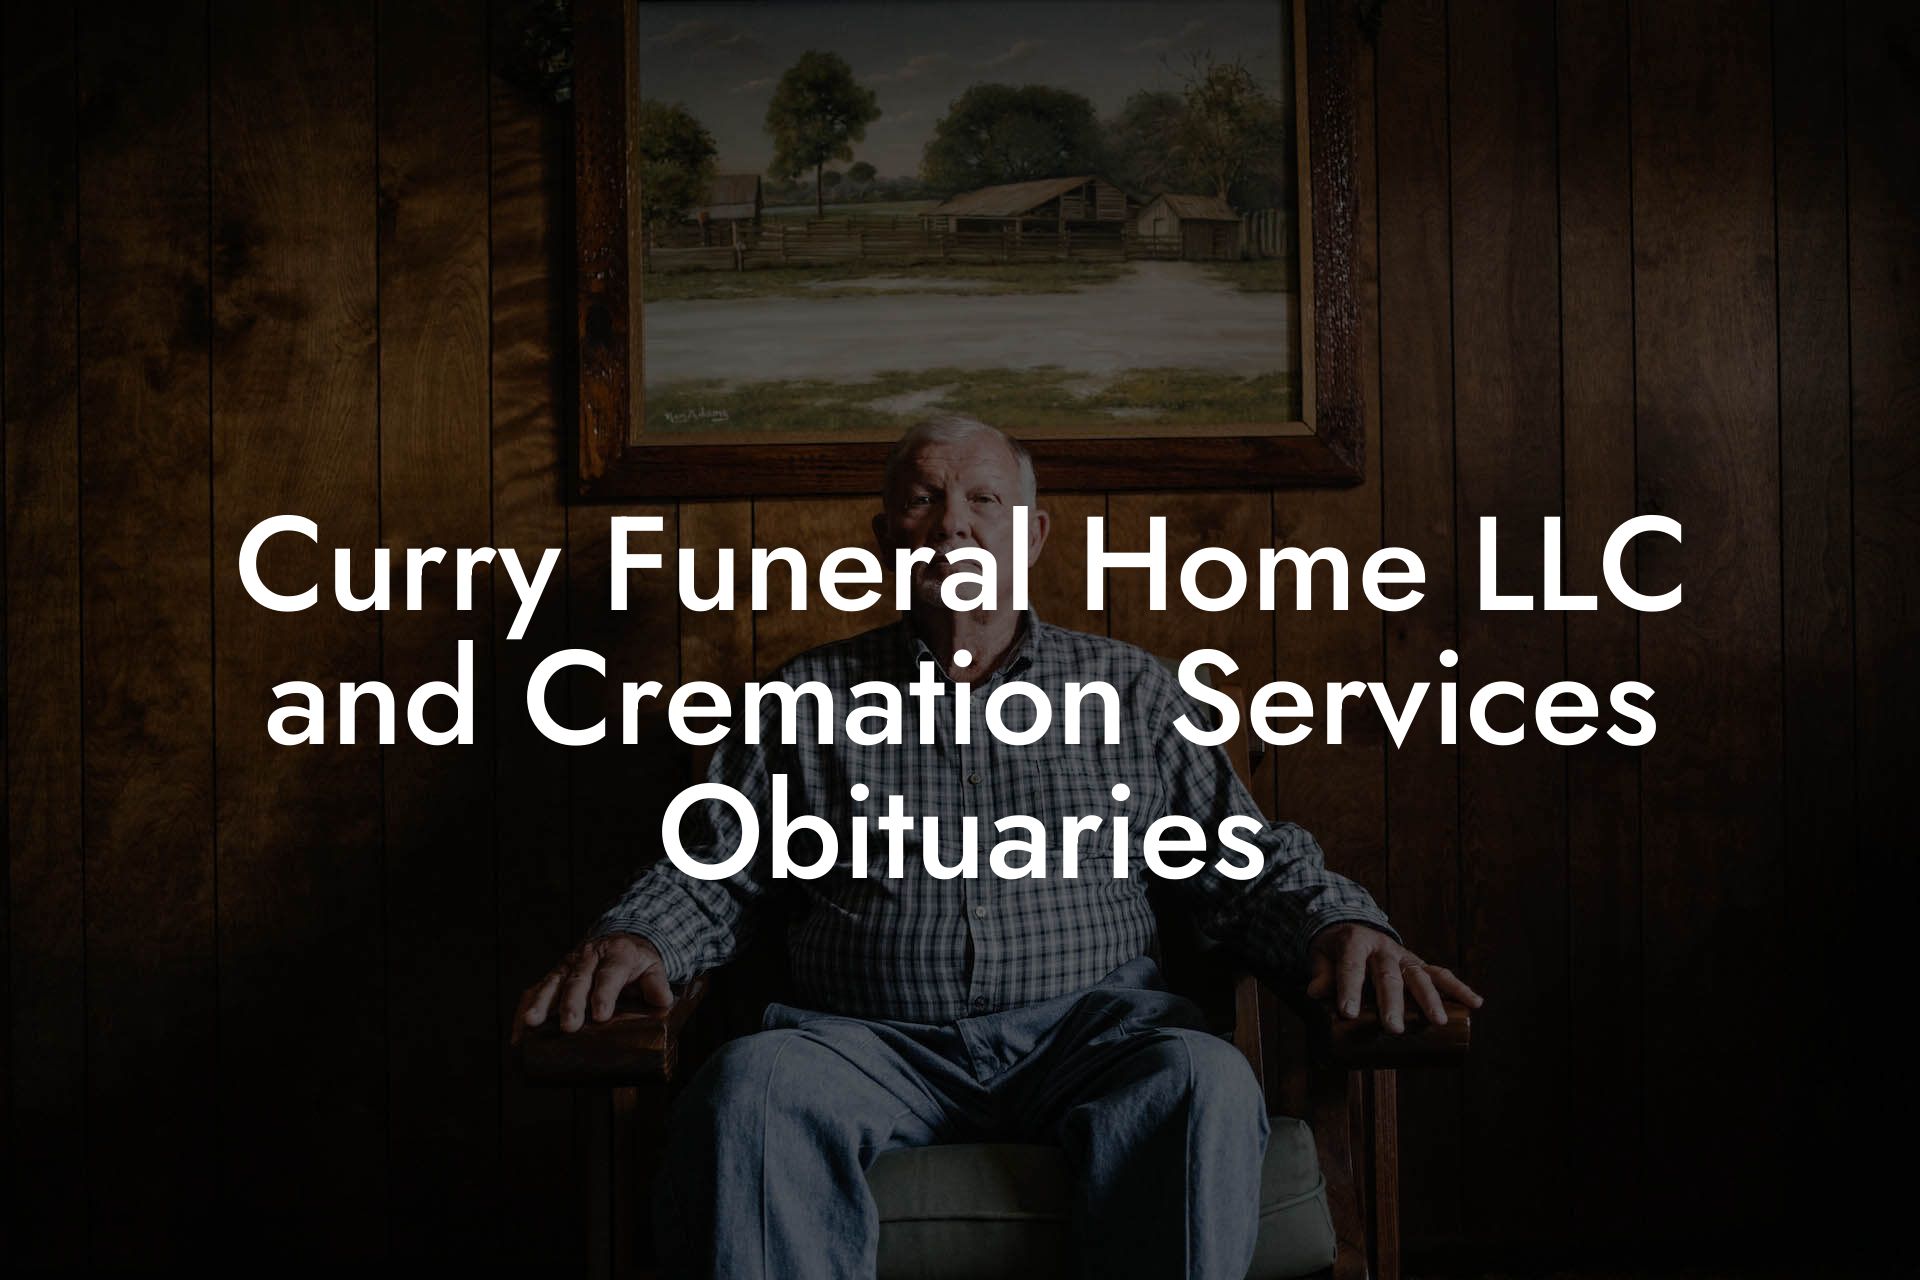 Curry Funeral Home LLC and Cremation Services Obituaries